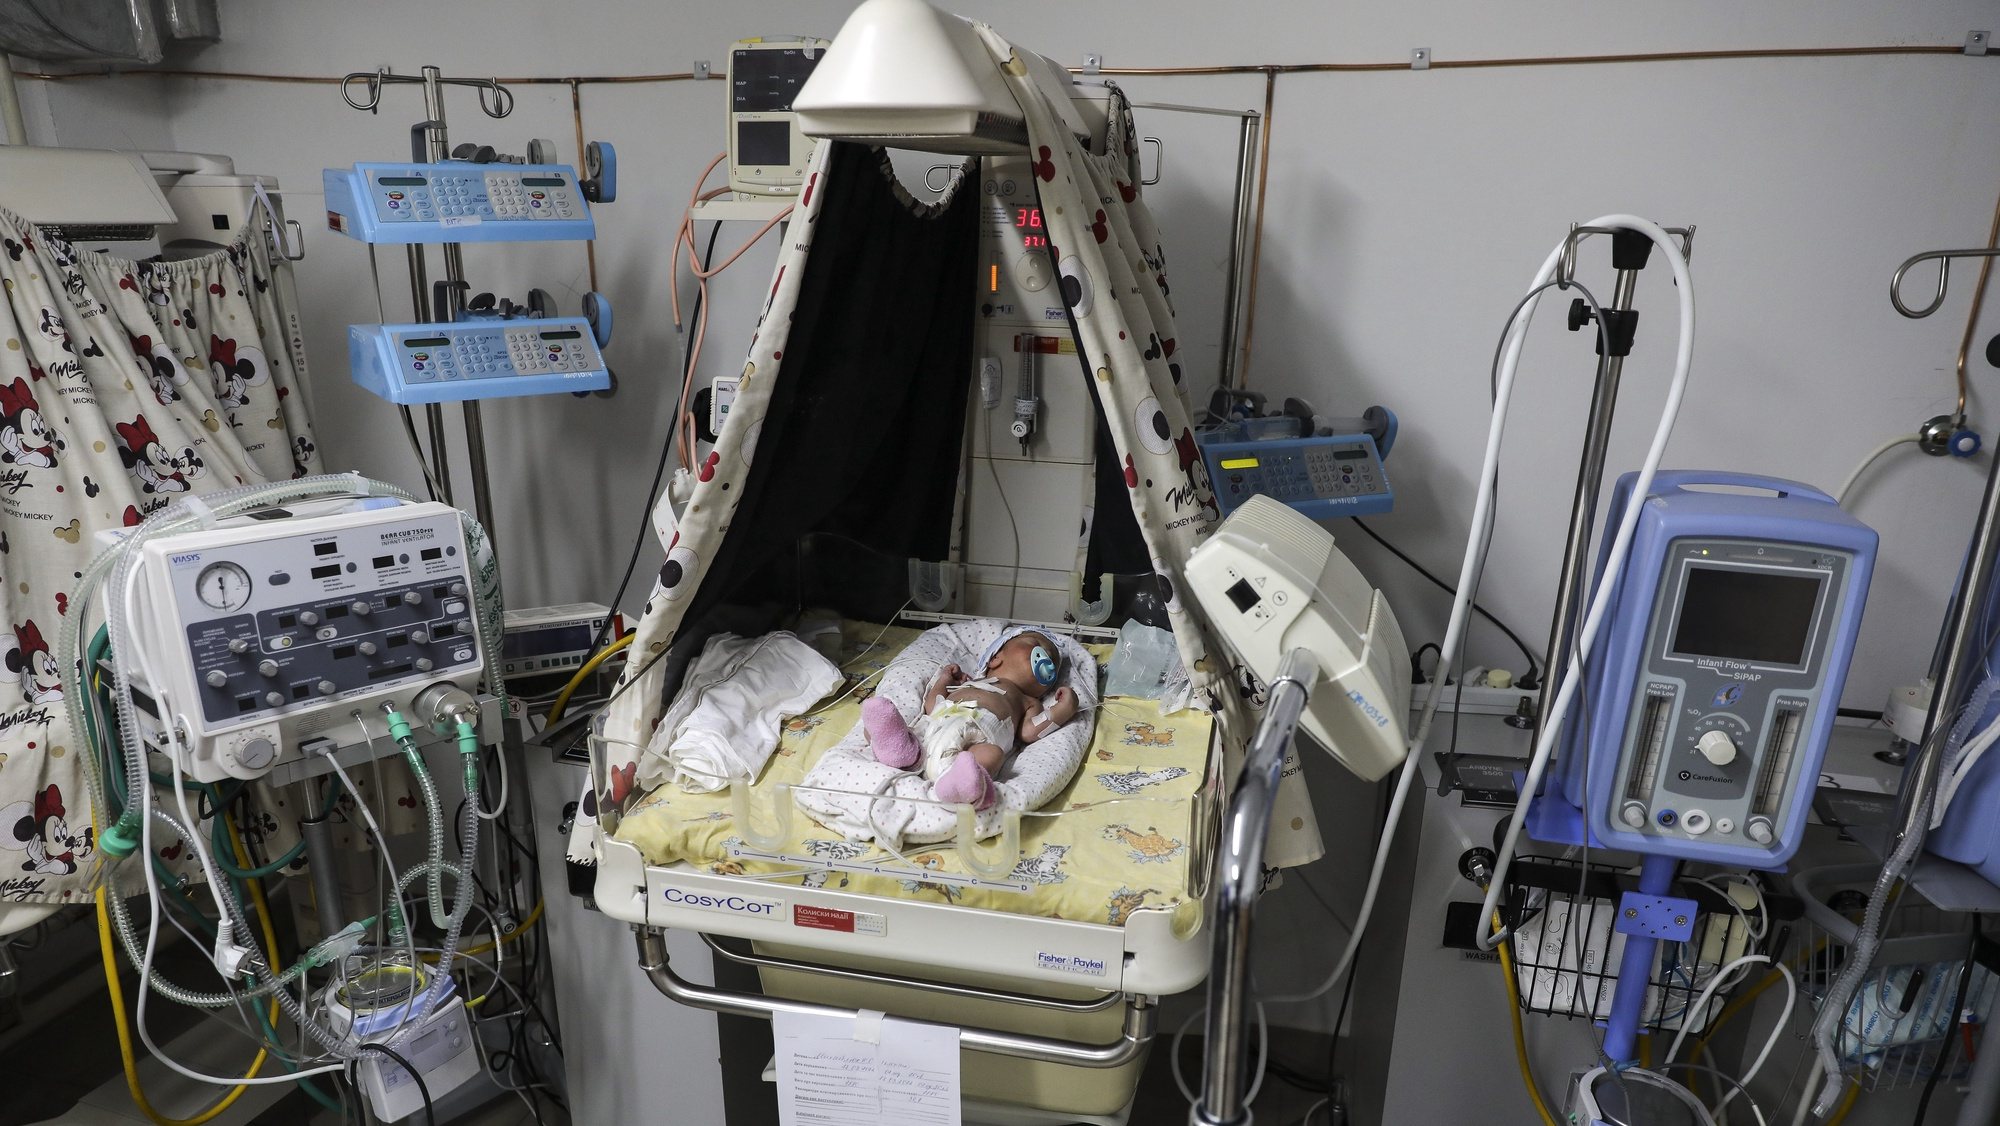 Maxime, born on the 18th of March with 32 weeks, in the Zhytomyr Regional Perinatal Center in Zhytomyr, Ukrain, 20th March 2022. This Center was bombarded on the early morning of 2th of March. Russian troops entered Ukraine on 24 February prompting the country&#039;s president to declare martial law and triggering a series of announcements by Western countries to impose severe economic sanctions on Russia. MIGUEL A. LOPES/LUSA